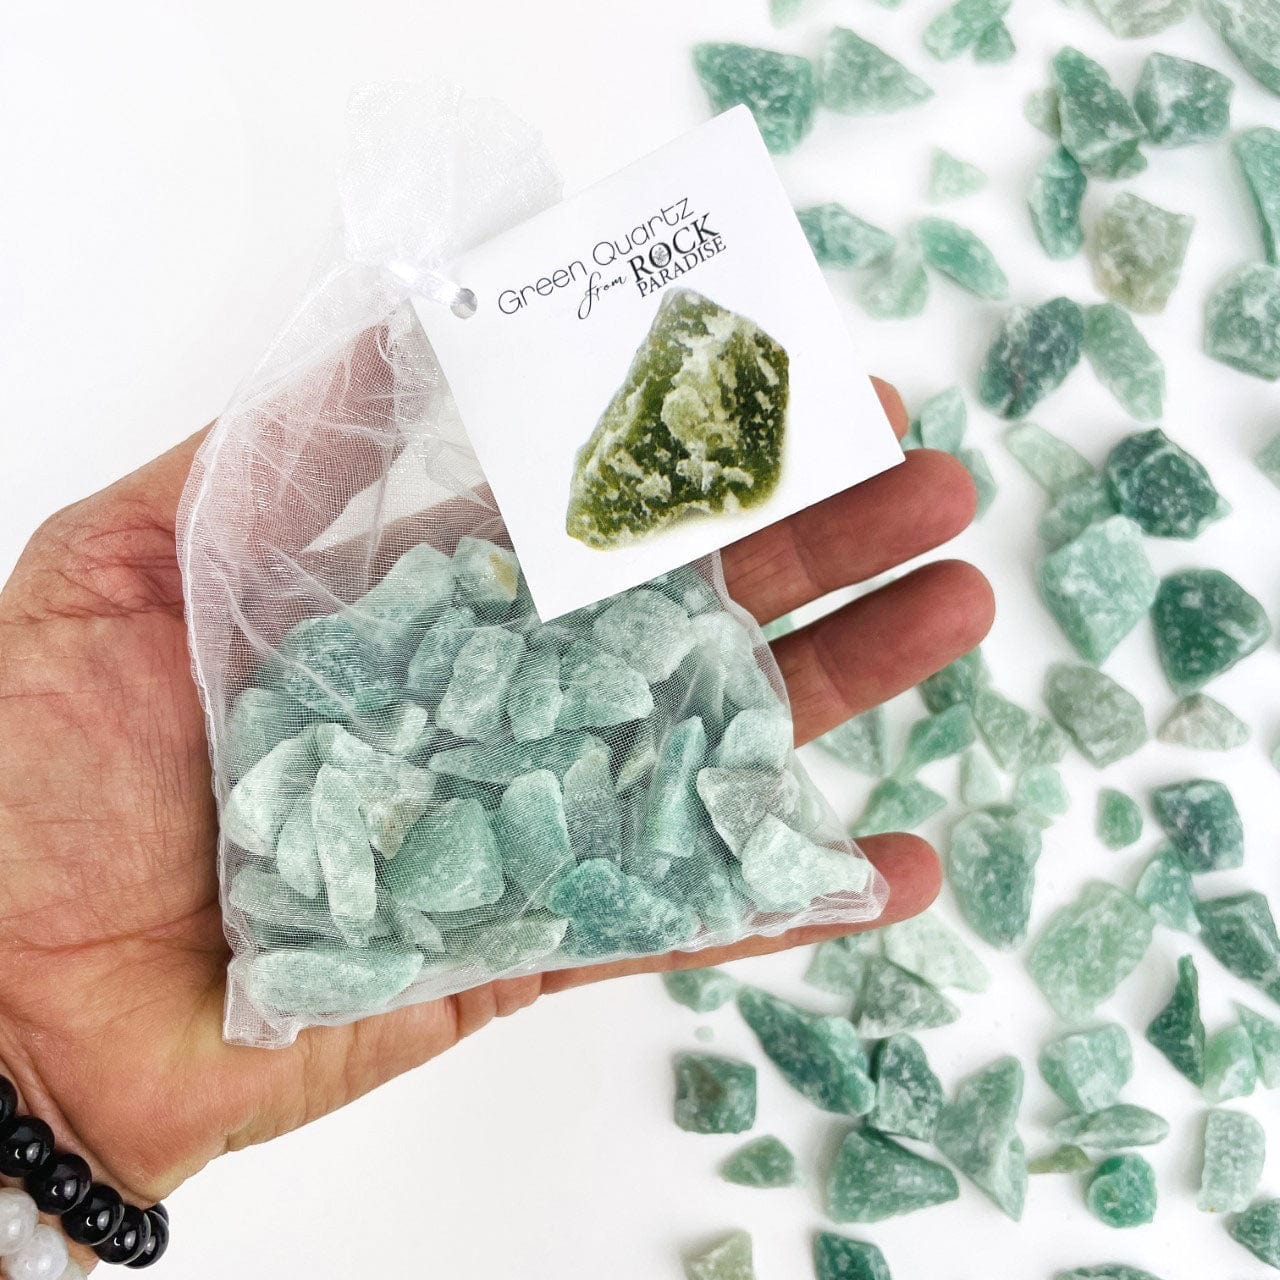 Green Quartz Stones - Tied & Tagged in an Organza Bag in a hand for size